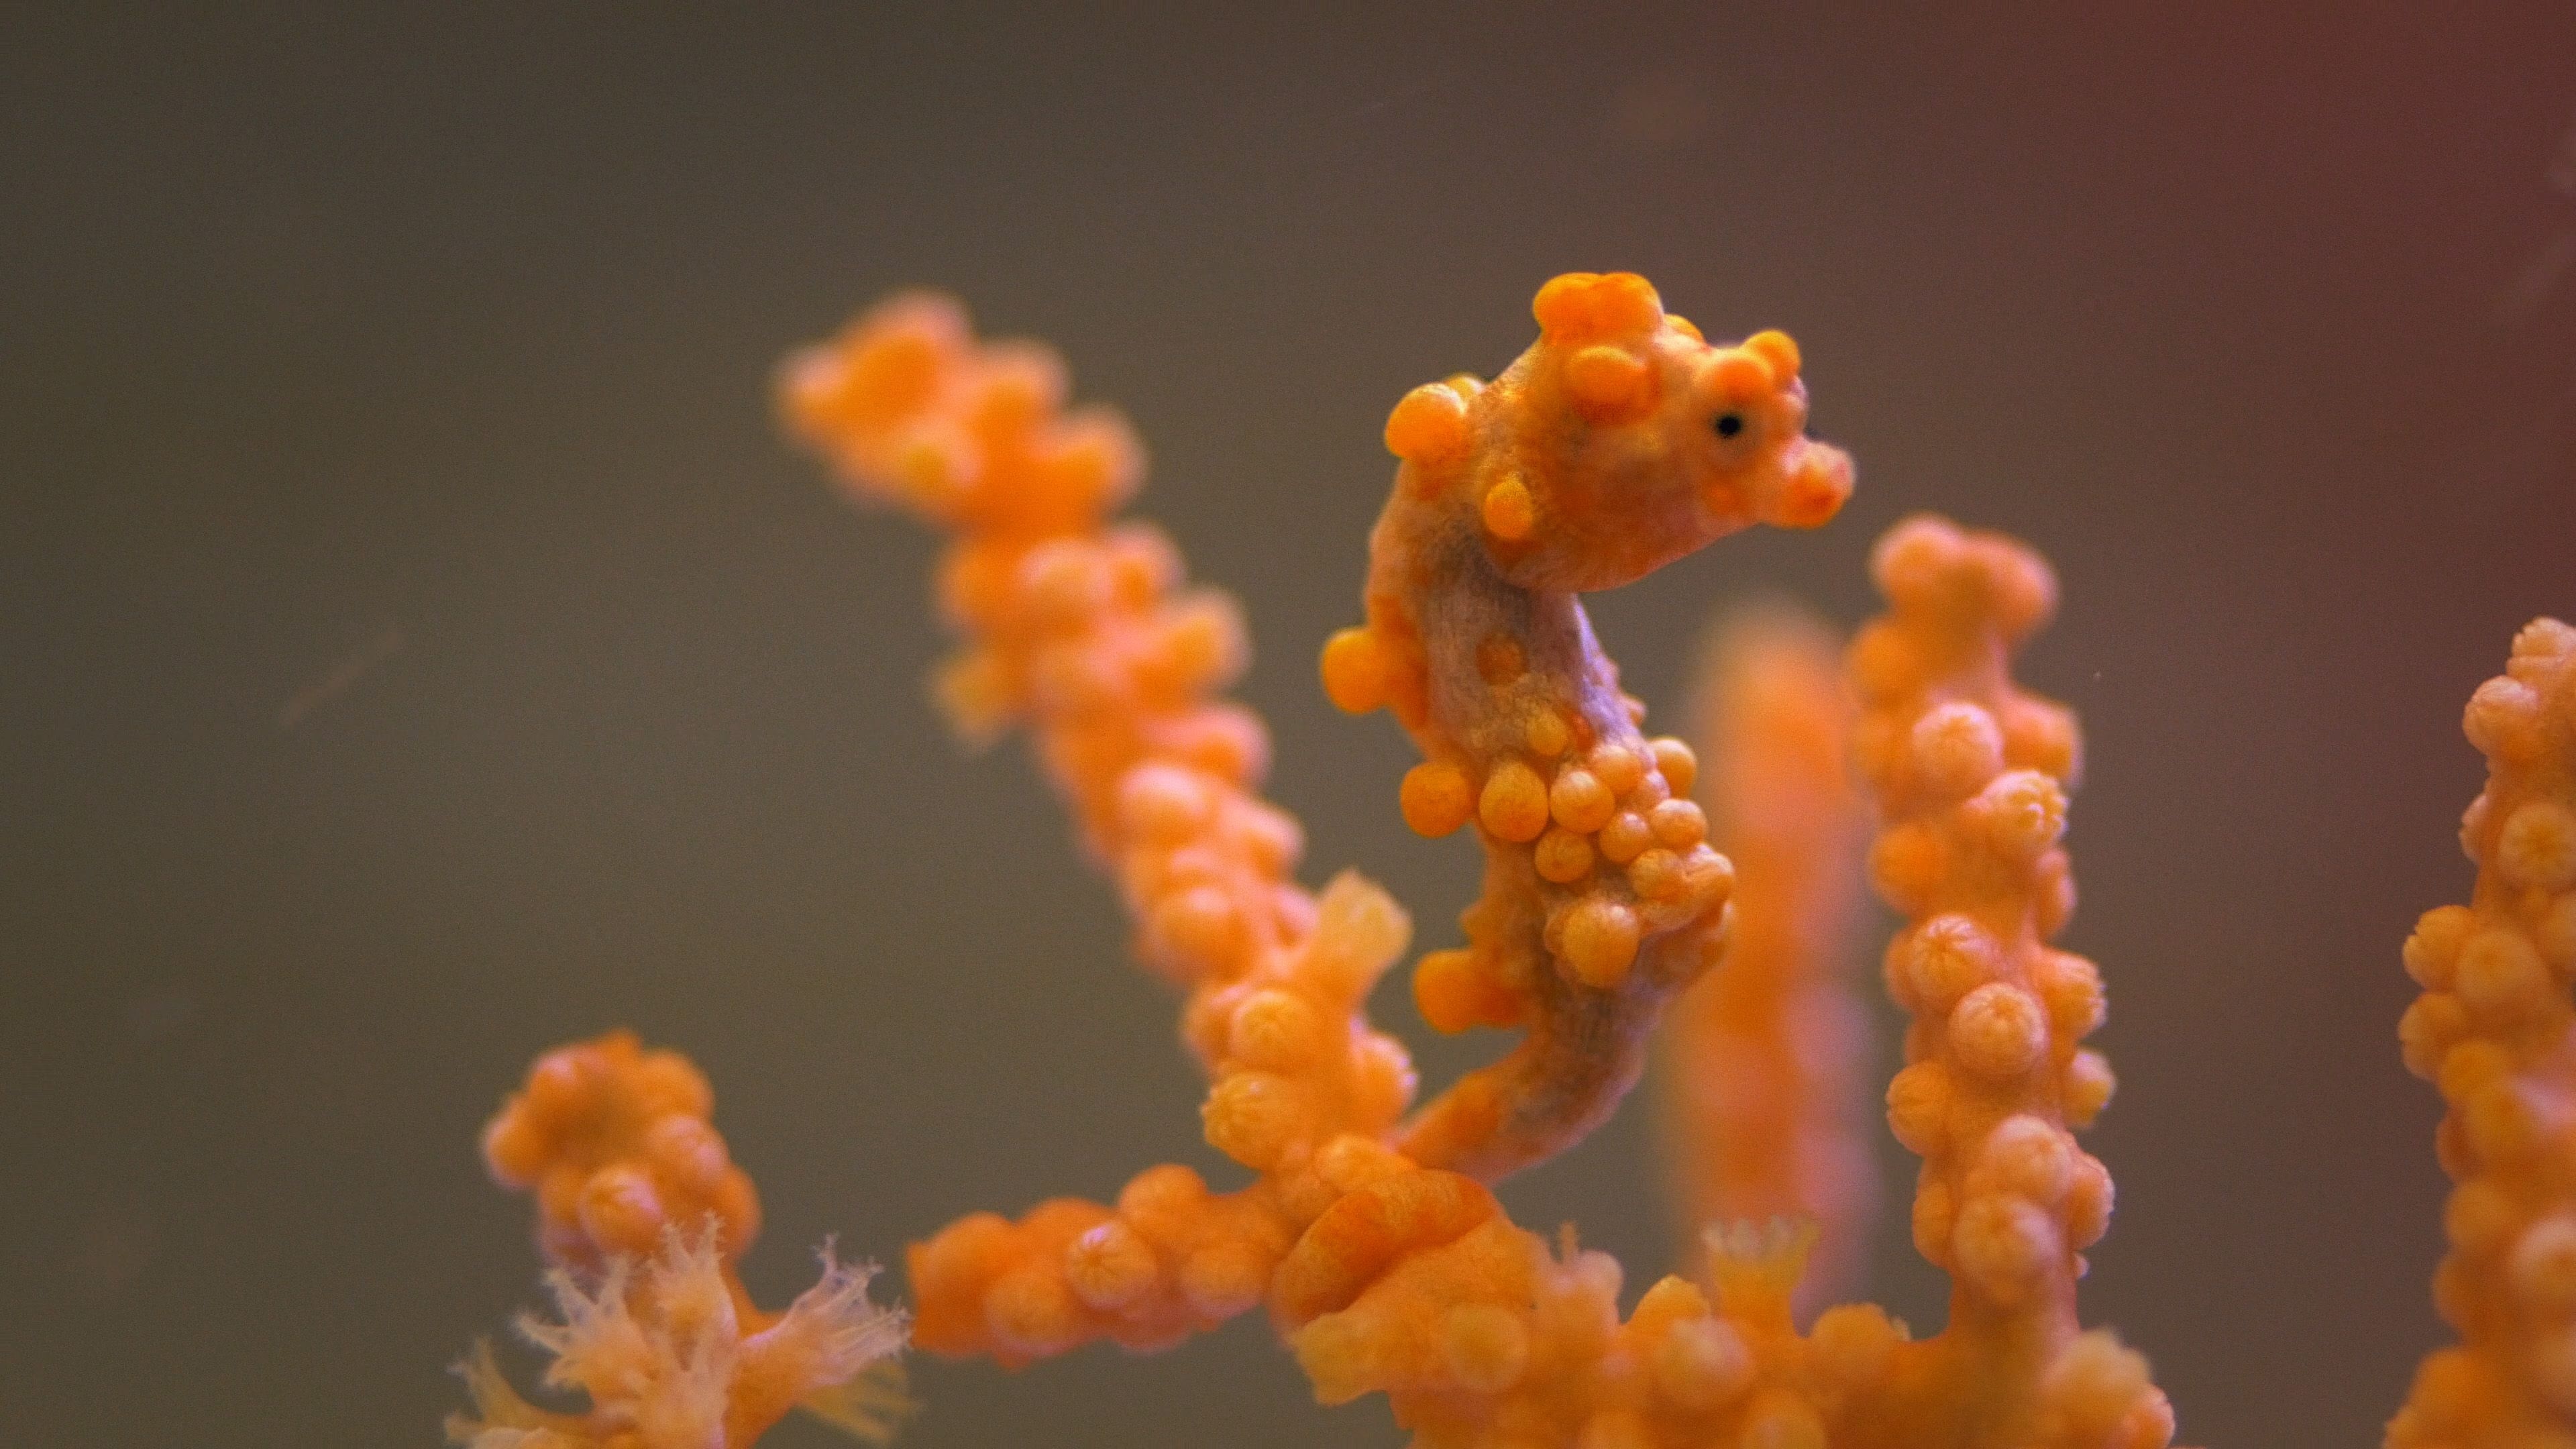 Pygmy seahorse's camouflage, Nature's disguise, Master of adaptation, Hidden beauty, 3840x2160 4K Desktop